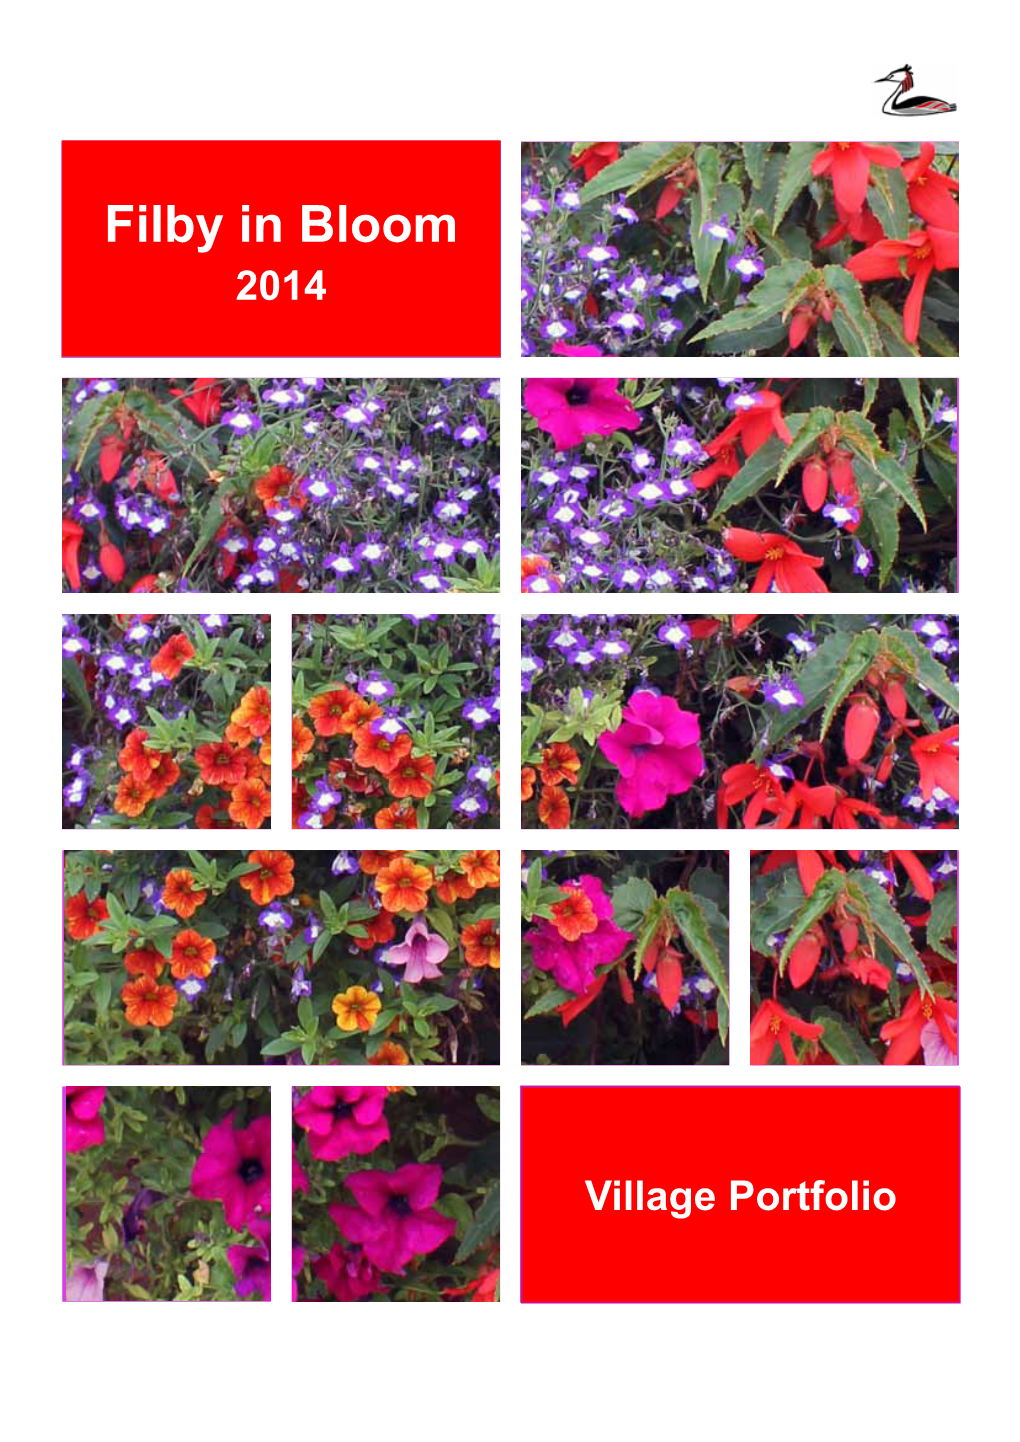 Filby in Bloom's Year